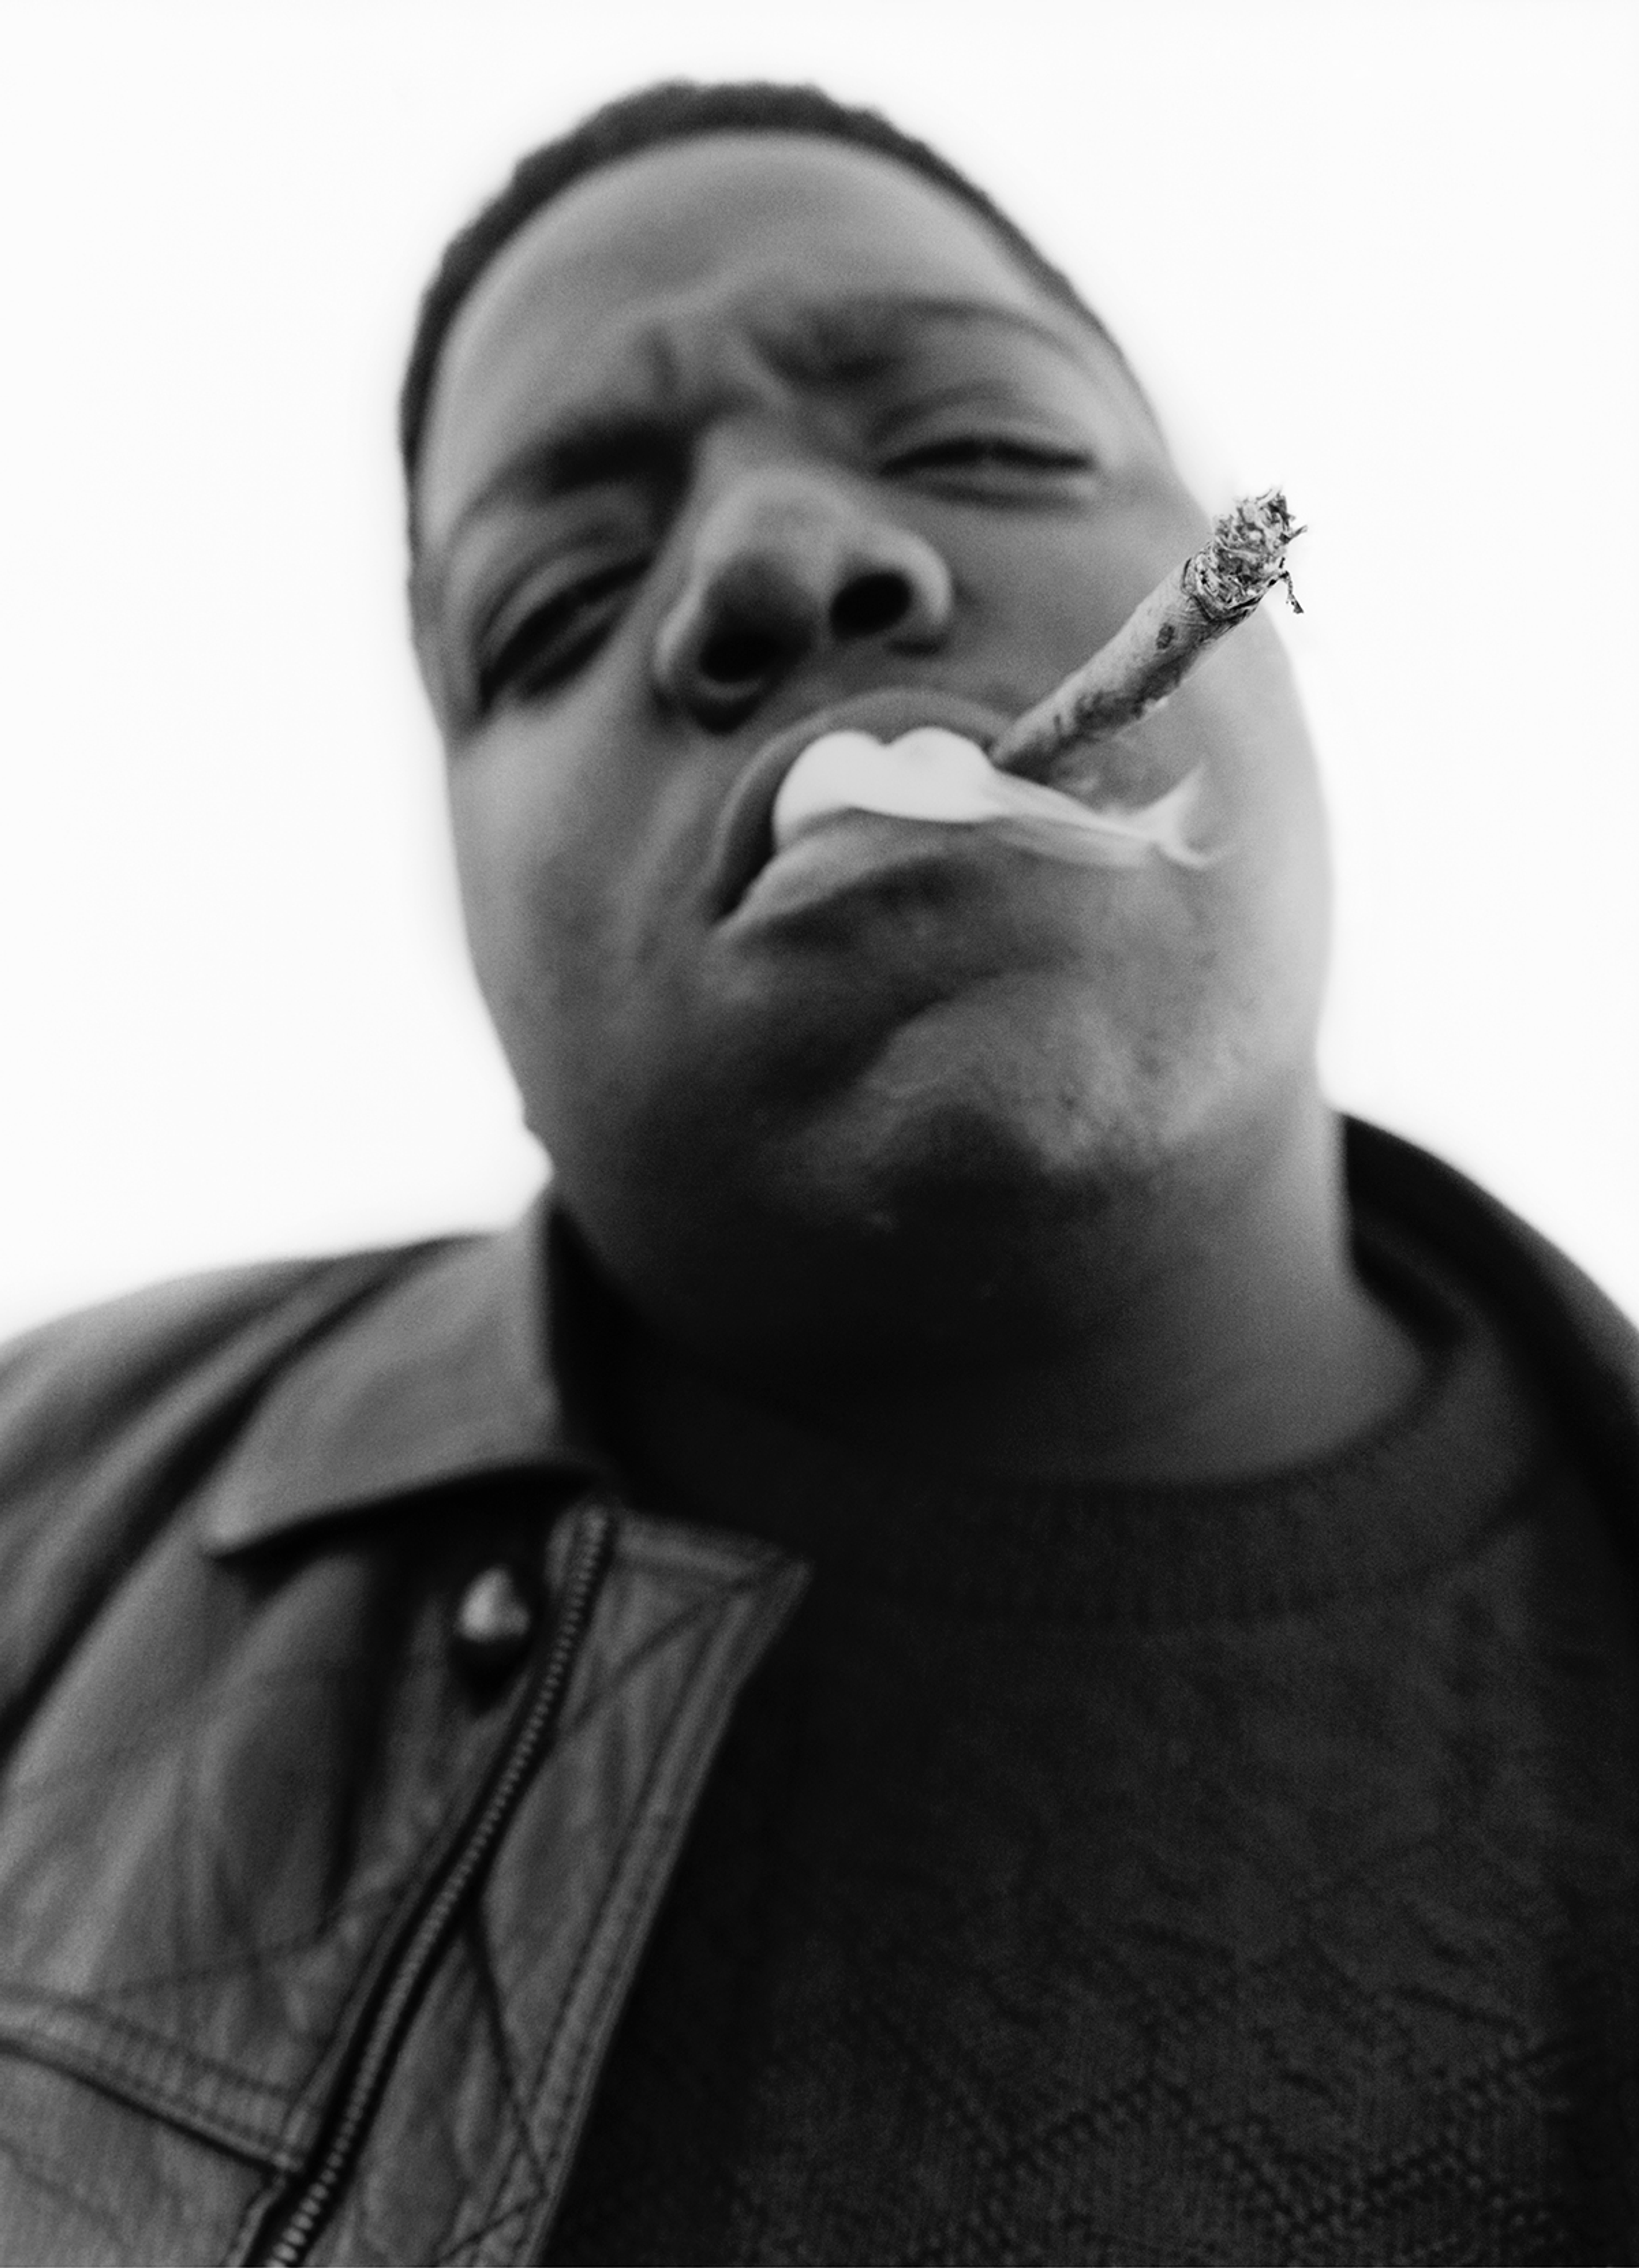 A black and white portrait of Notorious B.I.G. smoking